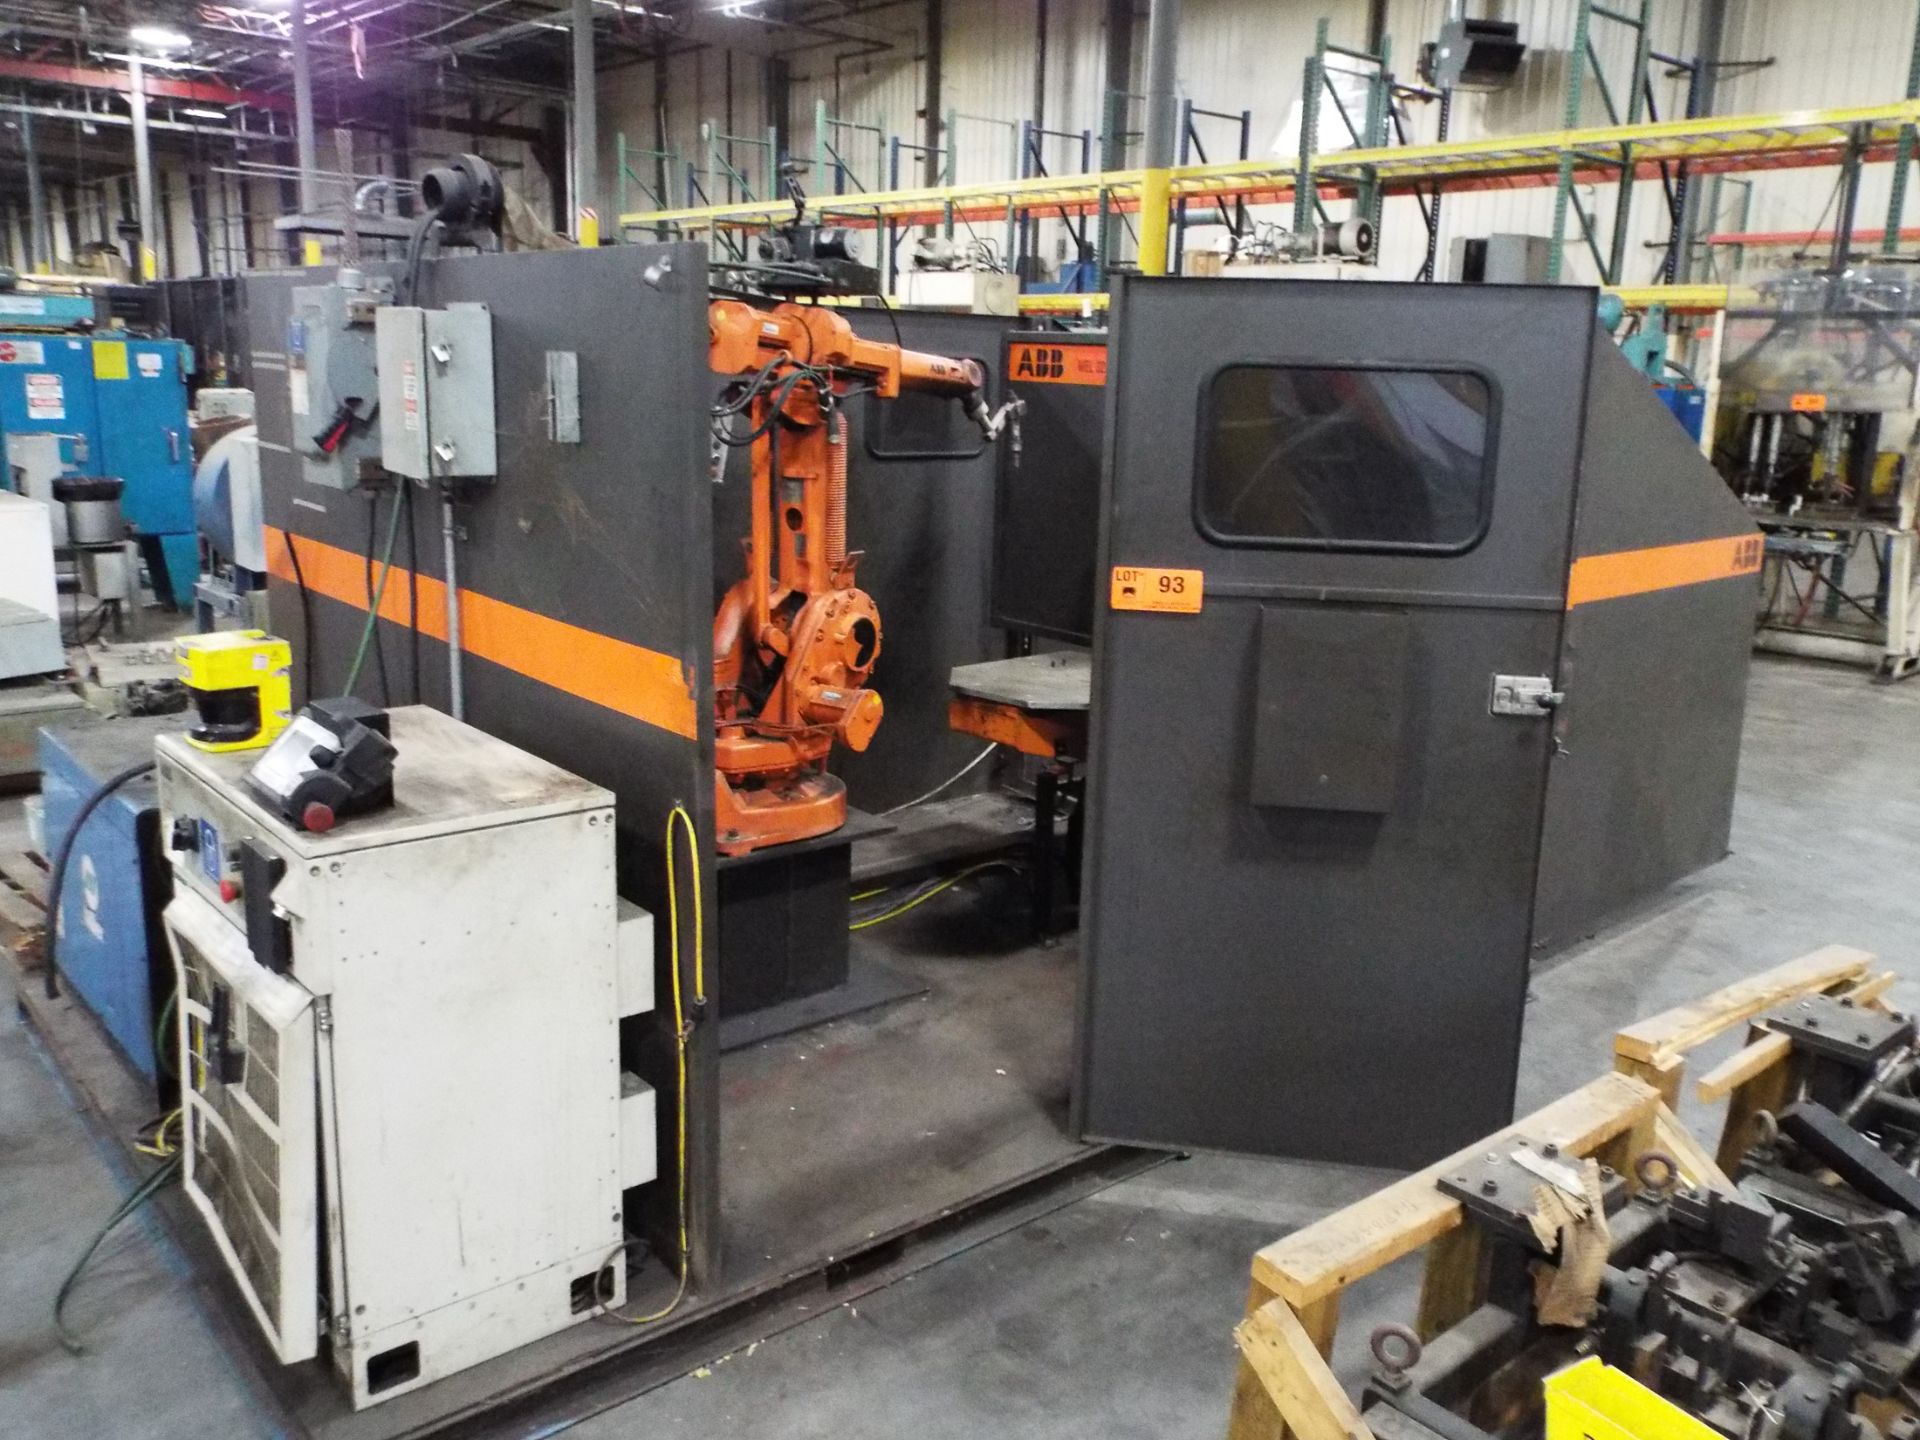 LOT/ ABB (2003) FLEXARC C ROBOTIC WELDING CELL CONSISTING OF LOTS 92 TO 98 (CI)